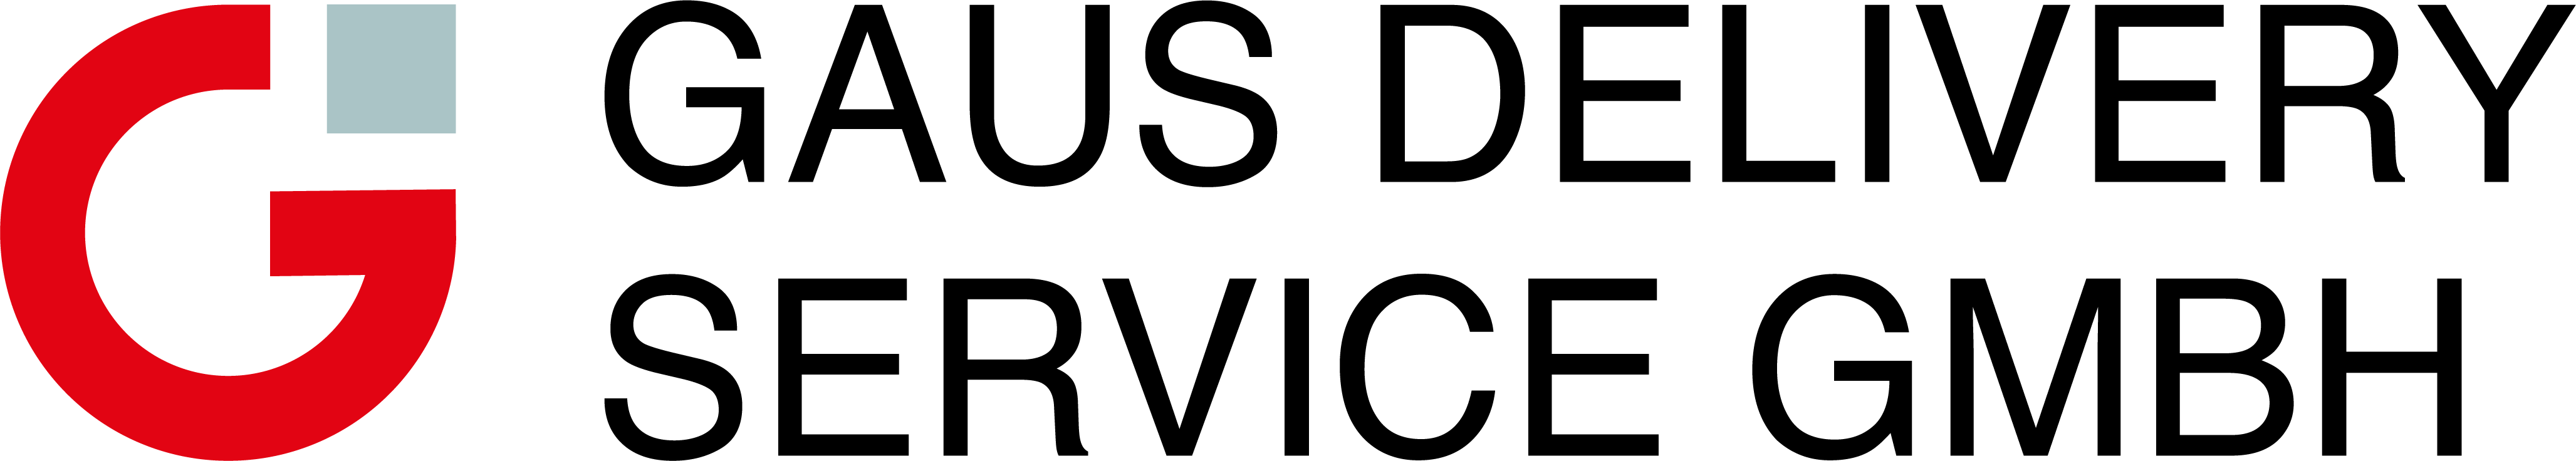 Gaus Delivery Service GmbH